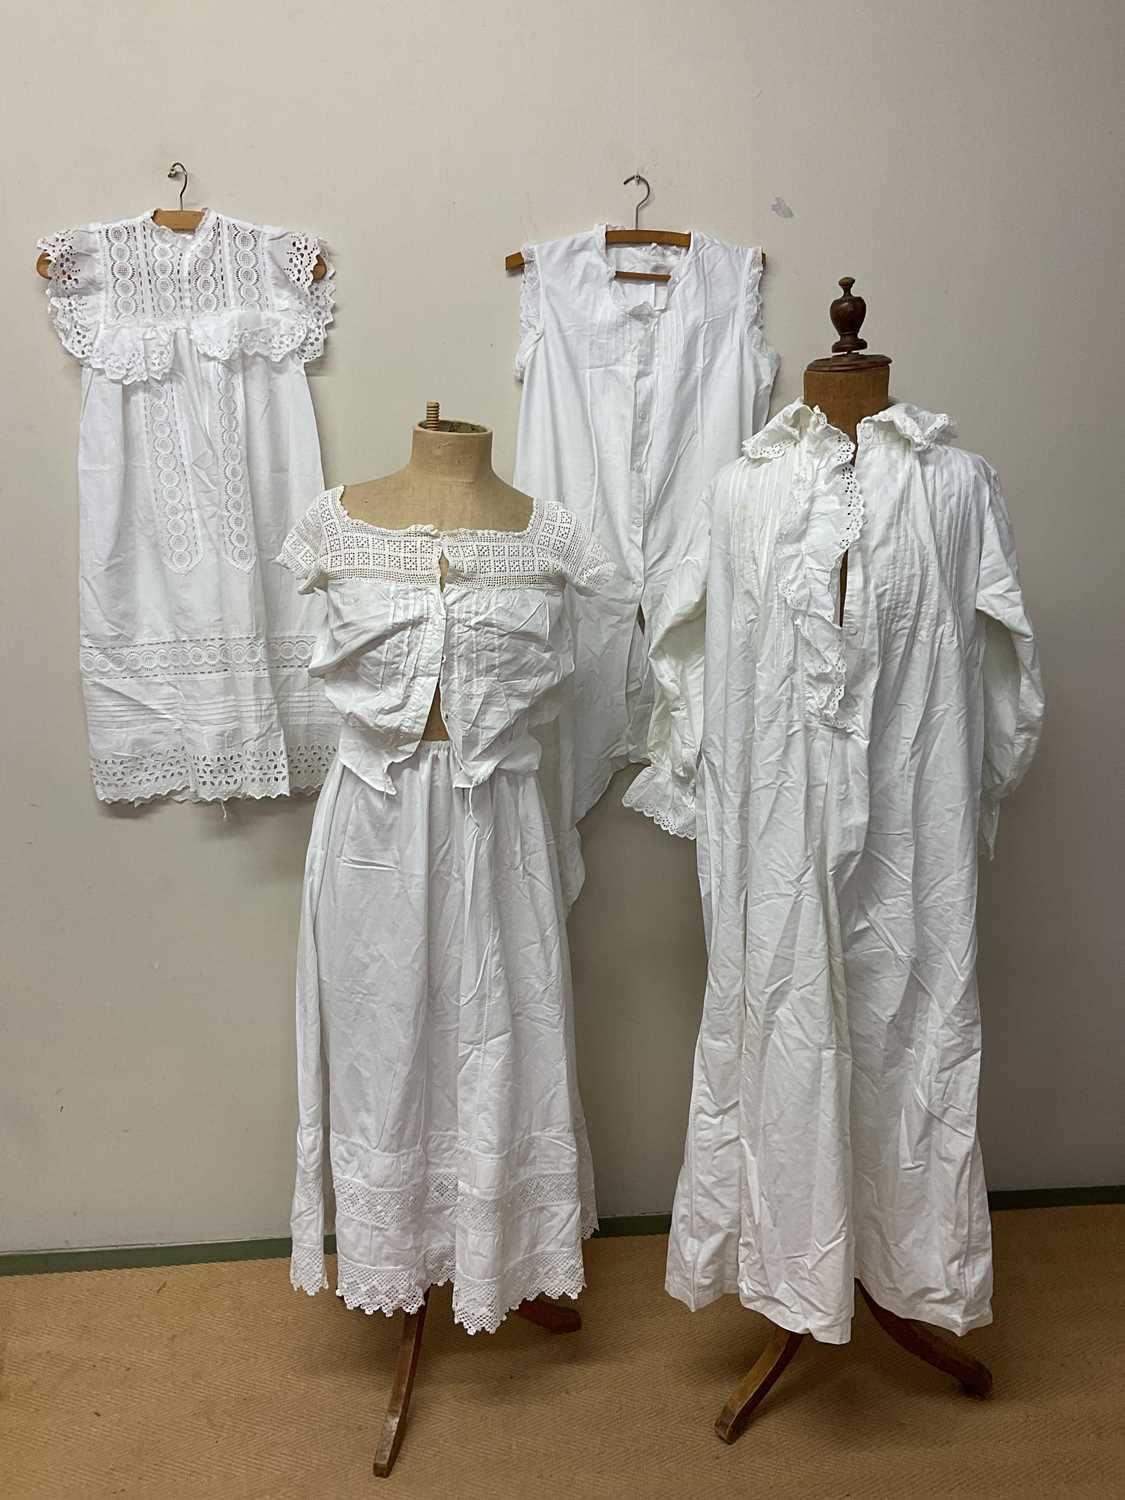 Items of vintage clothing including a quantity of 19th and 20th century embroidered cotton and linen